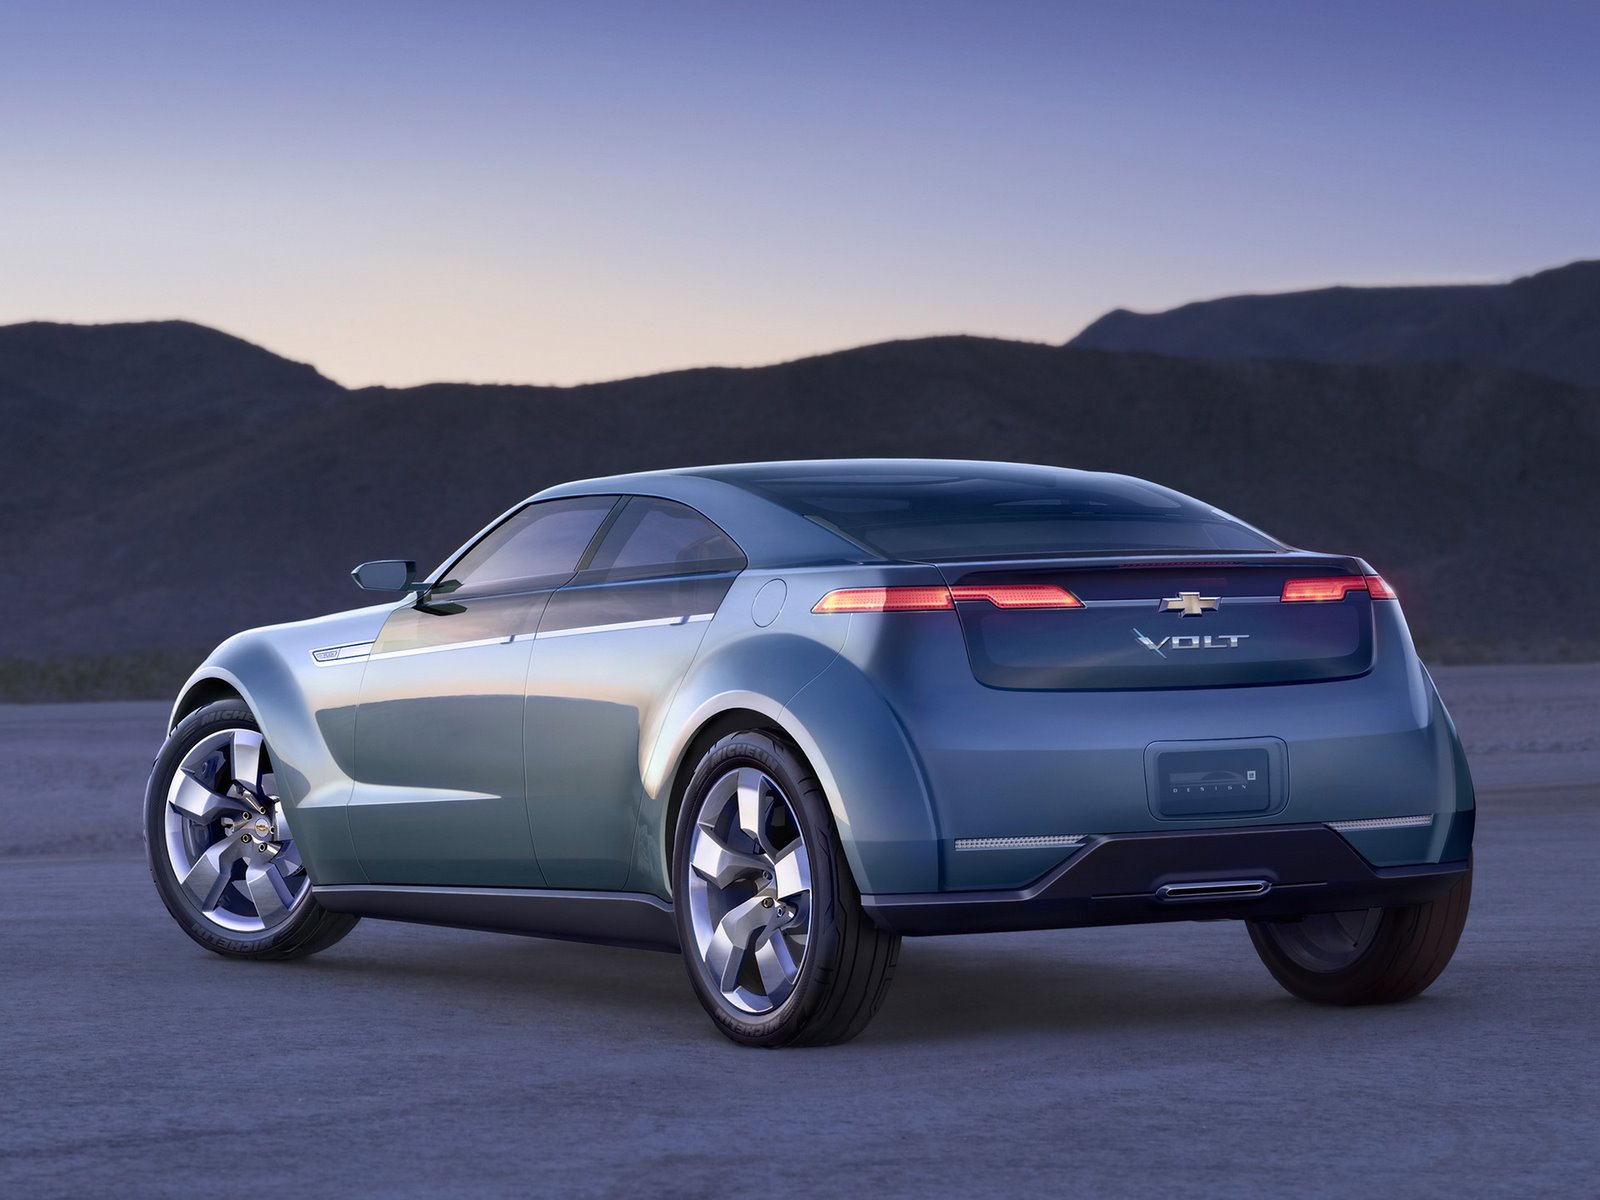 [2007-Chevrolet-Volt-Concept-Rear-And-Side-1920x1440.jpg]